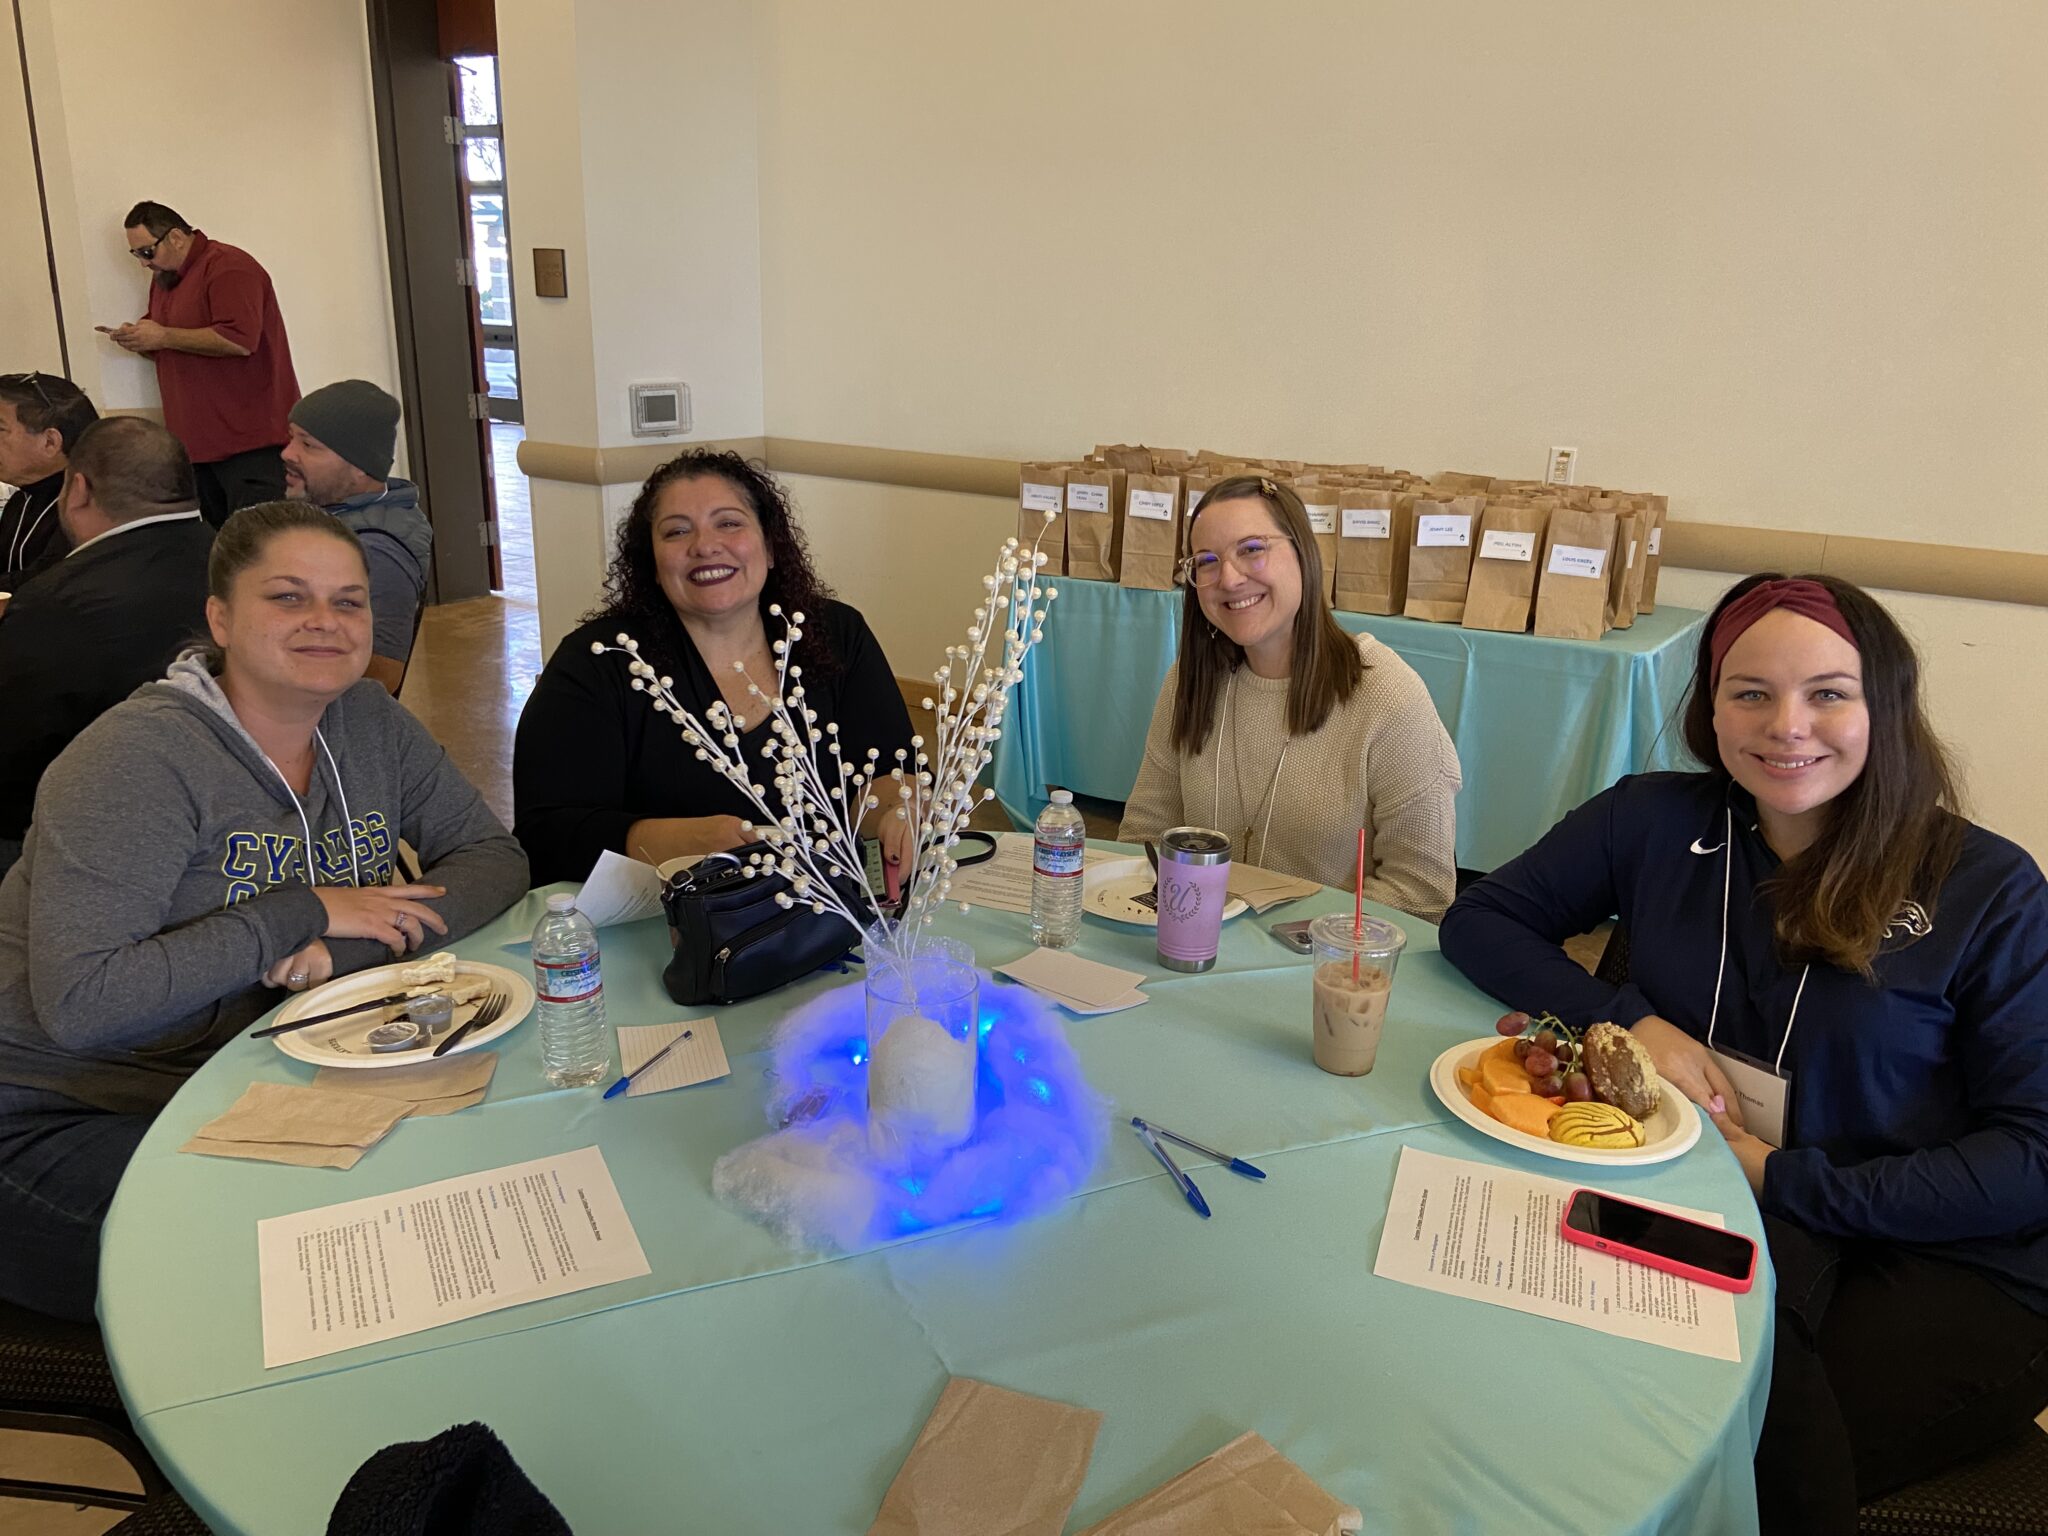 Four classified staff take a group photo at their winter themed table while enjoying their breakfast.